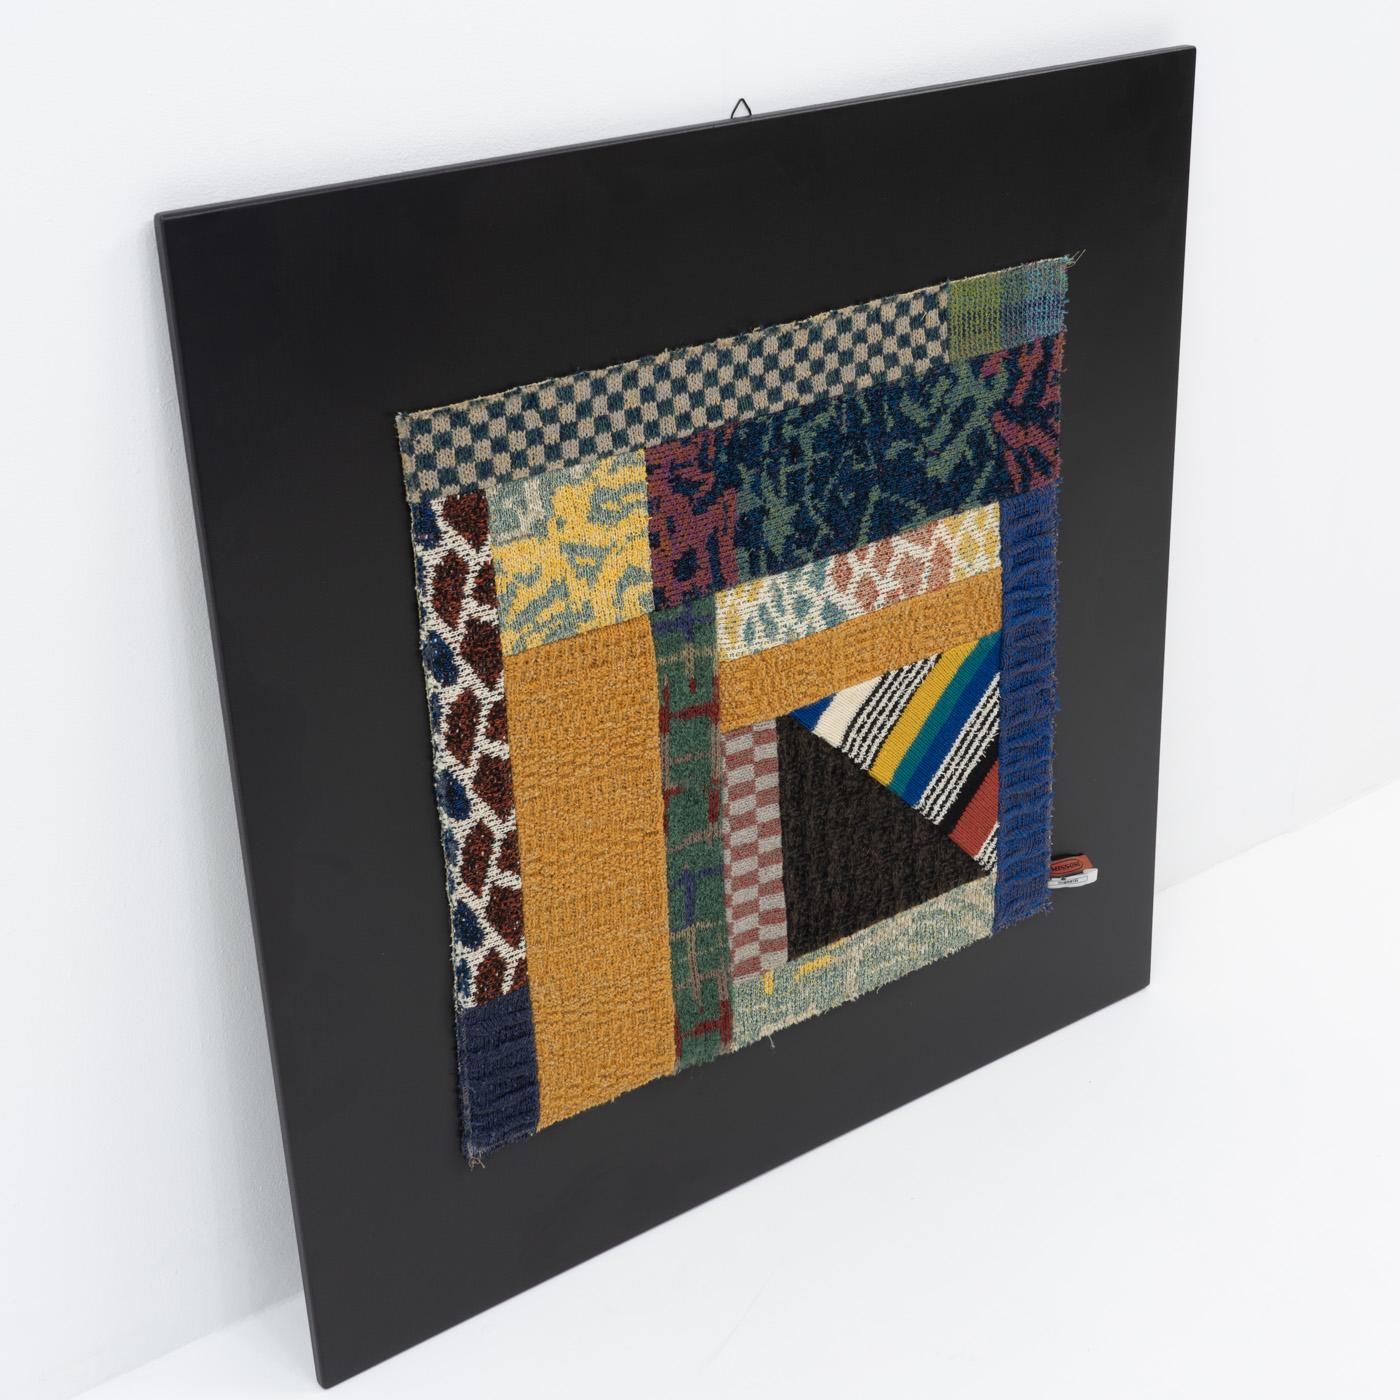 Italian collectable tapestry, professionally framed. This piece, considered a work of art has been designed by Ottavio Missoni, (1921 – 2013) during the 1980s.

The Missoni enterprise was founded during the early 1950s, over the years the business